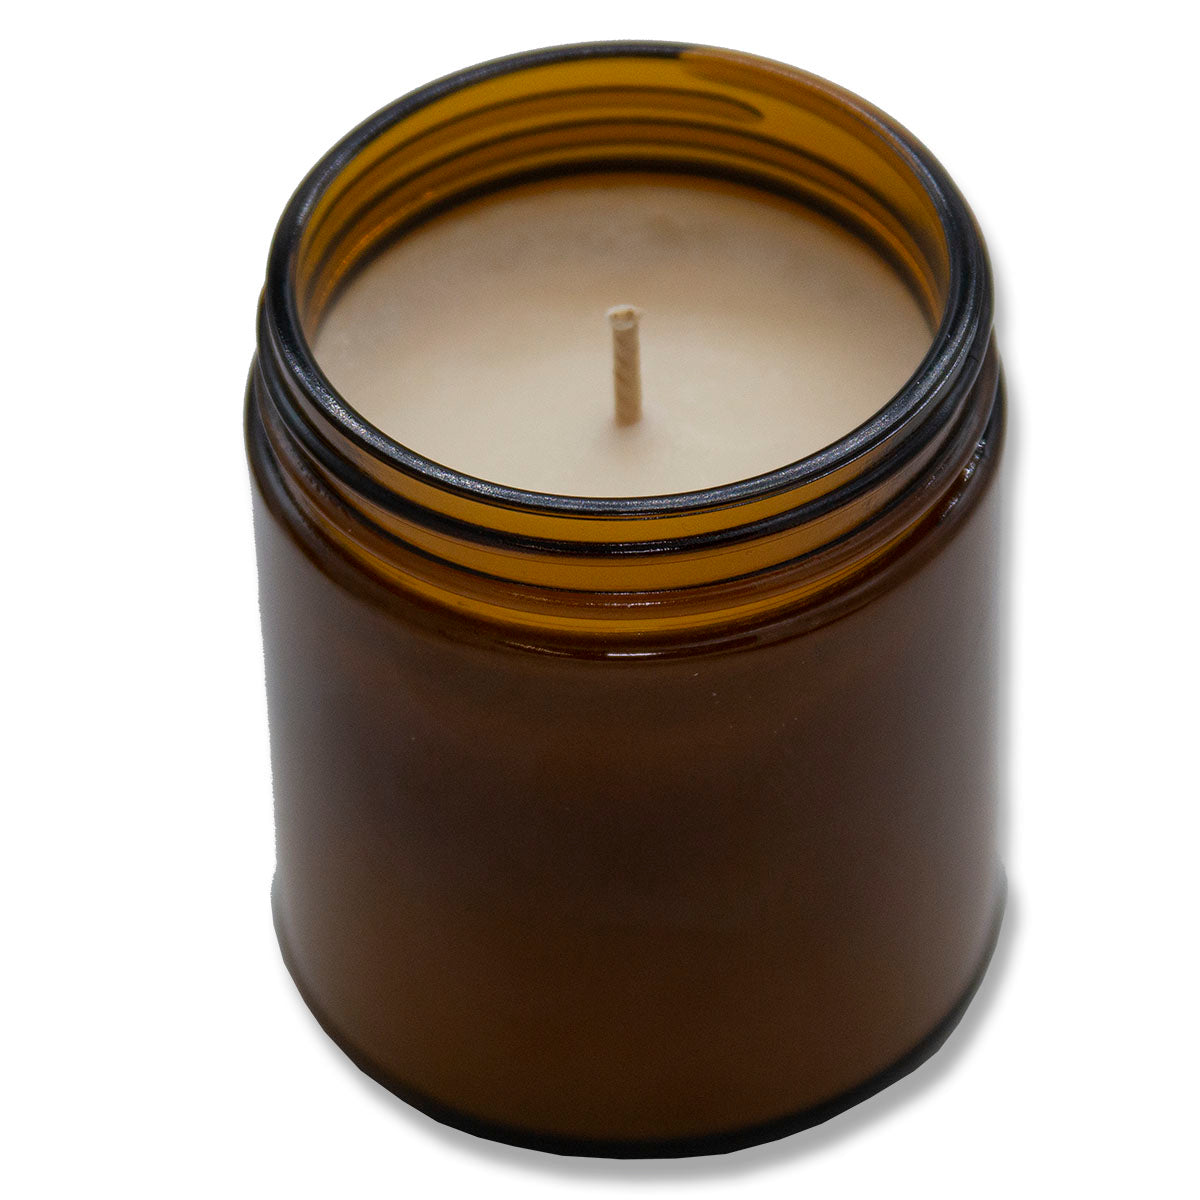 Autumn Cider, Lone Star Candles & More's Premium Hand Poured Strongly Scented Soy Wax Gift Candle, Fall Spices, Sweet Musk, & A Hint of Pineapple, US Made in Texas, Amber Glass Jar 9oz Best Mom